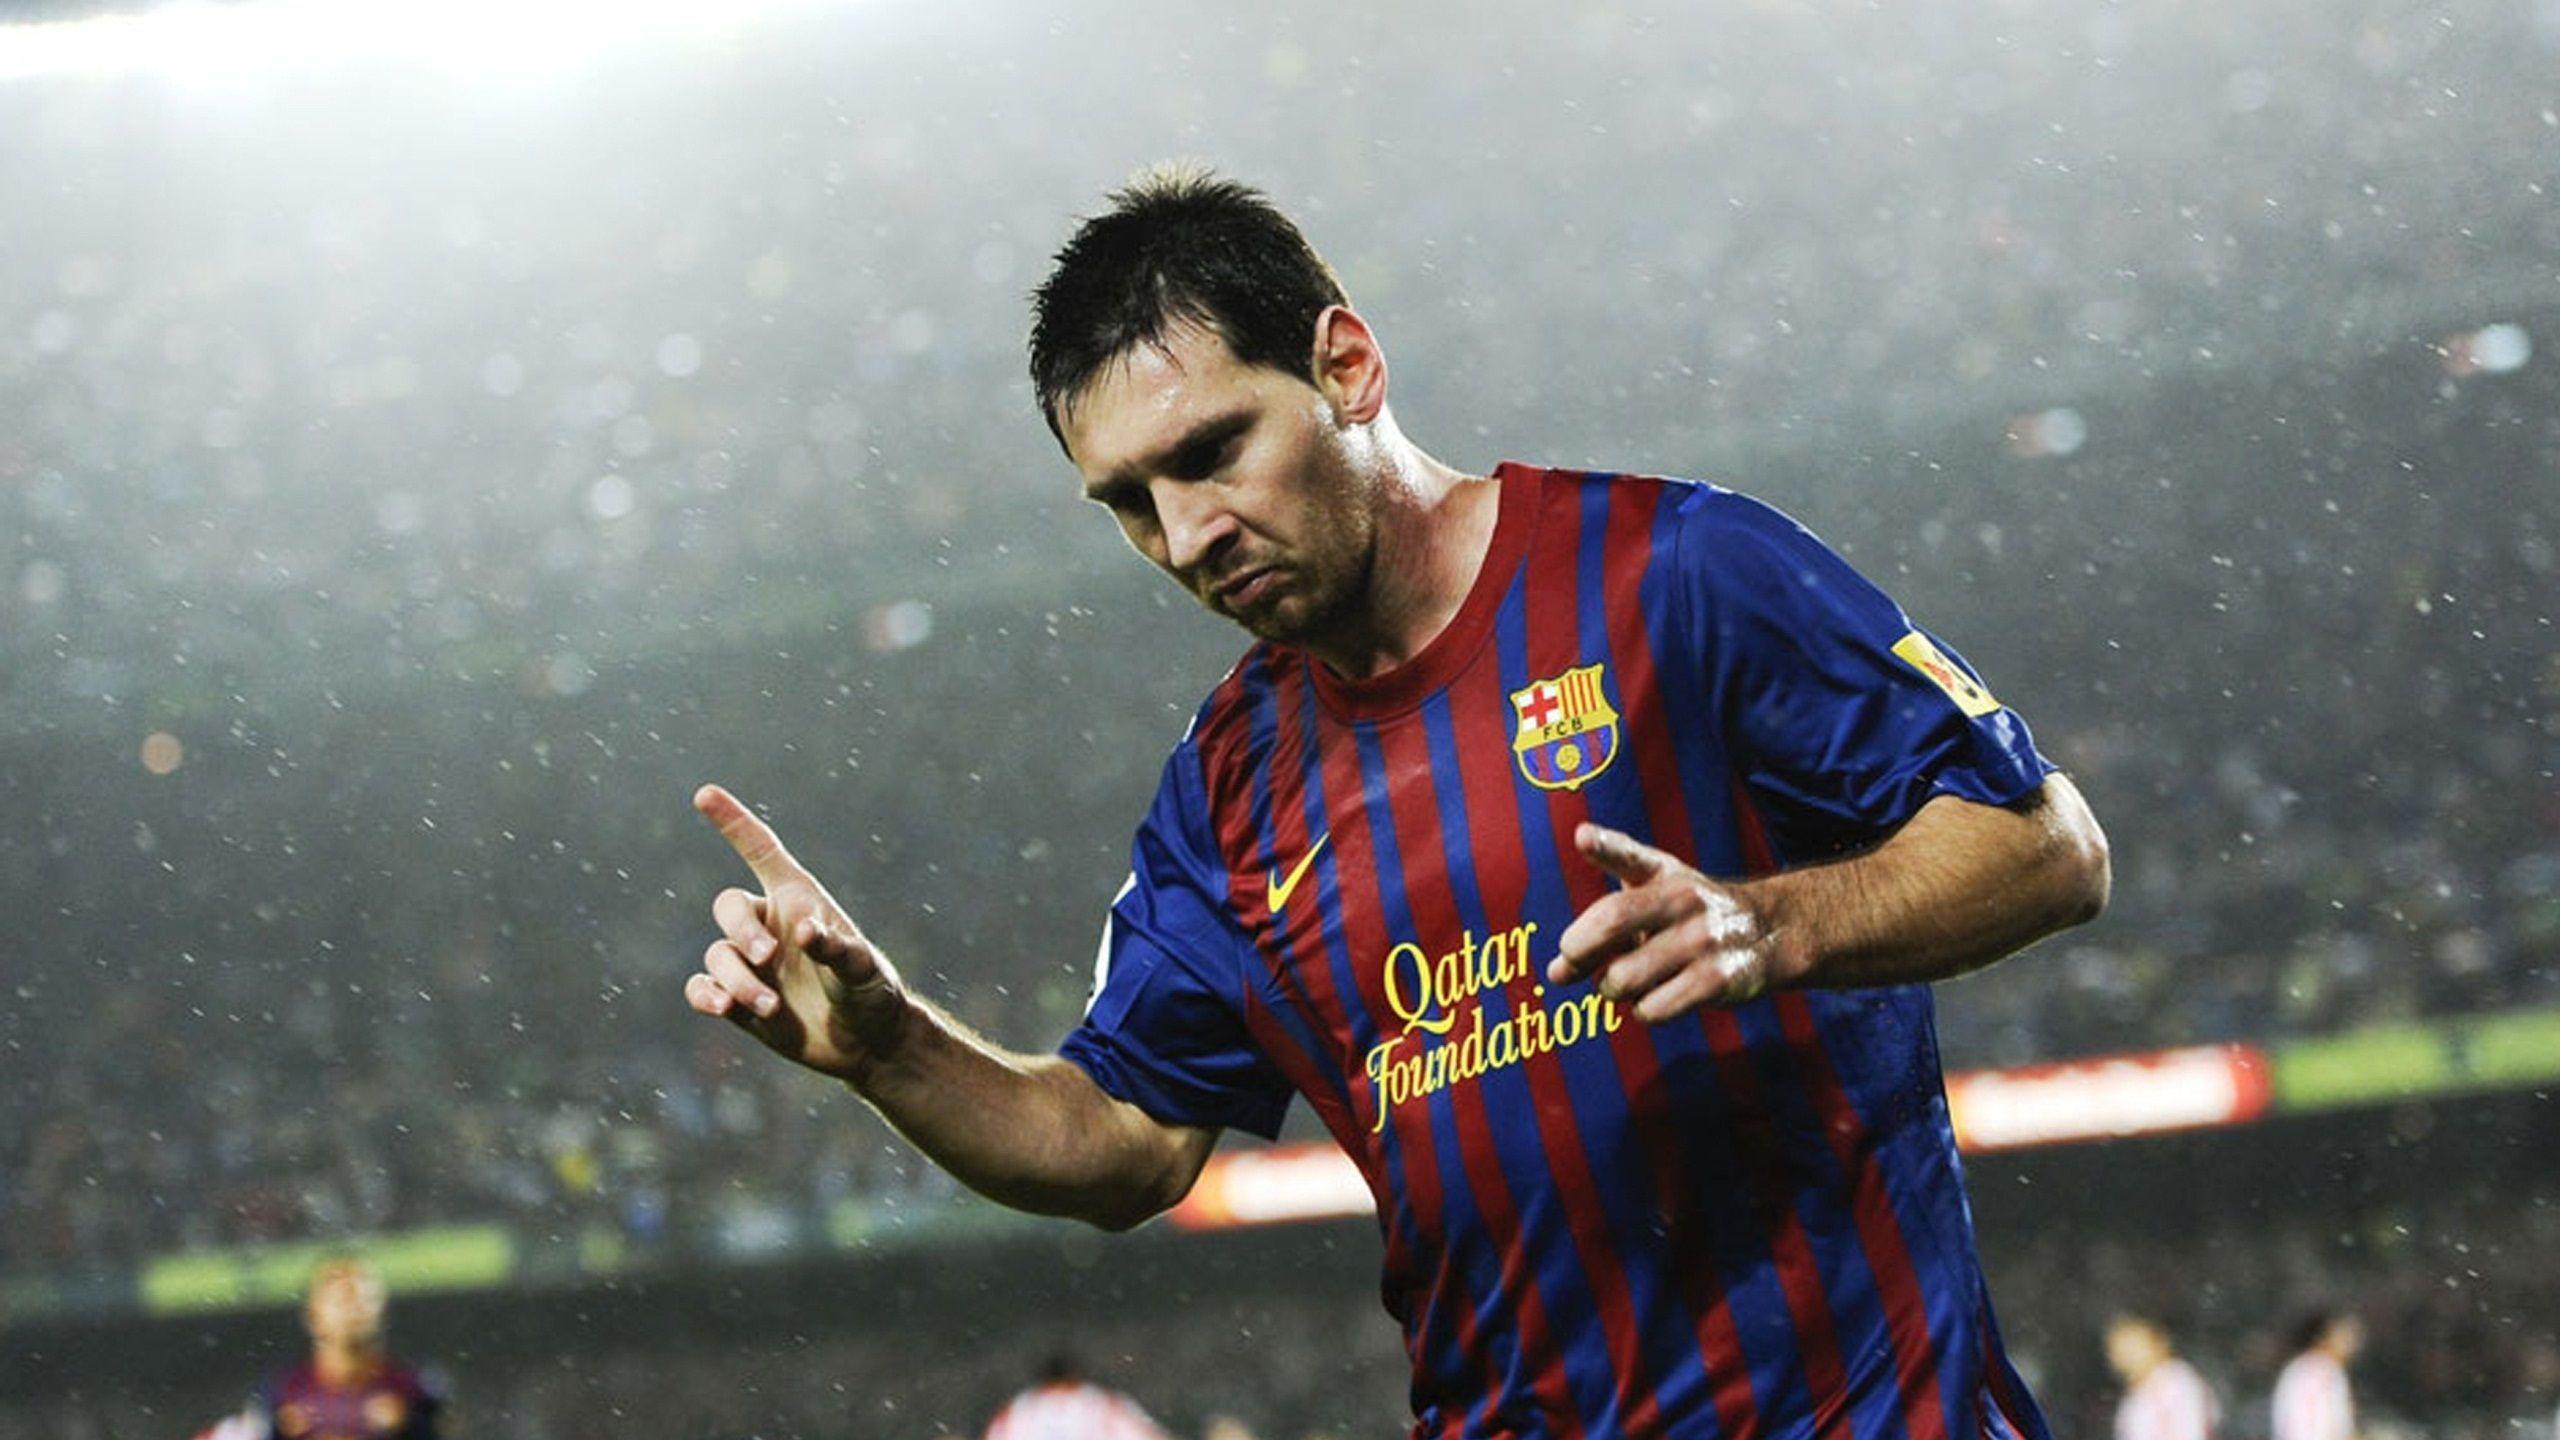 Lionel Messi Wallpaper High Quality